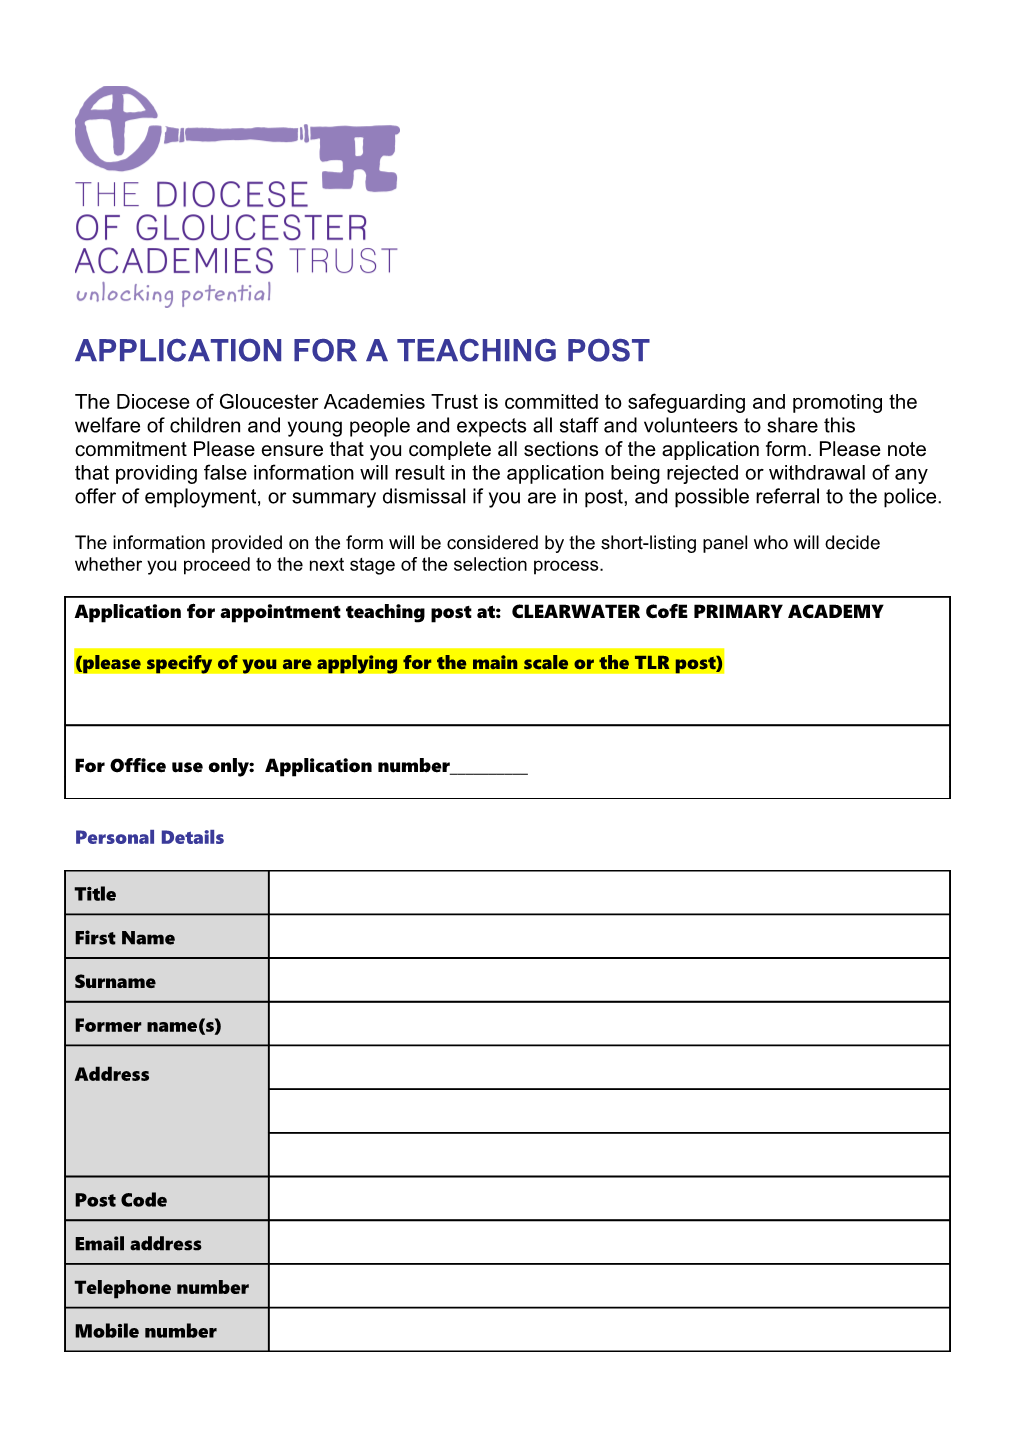 Application for a Teaching Post